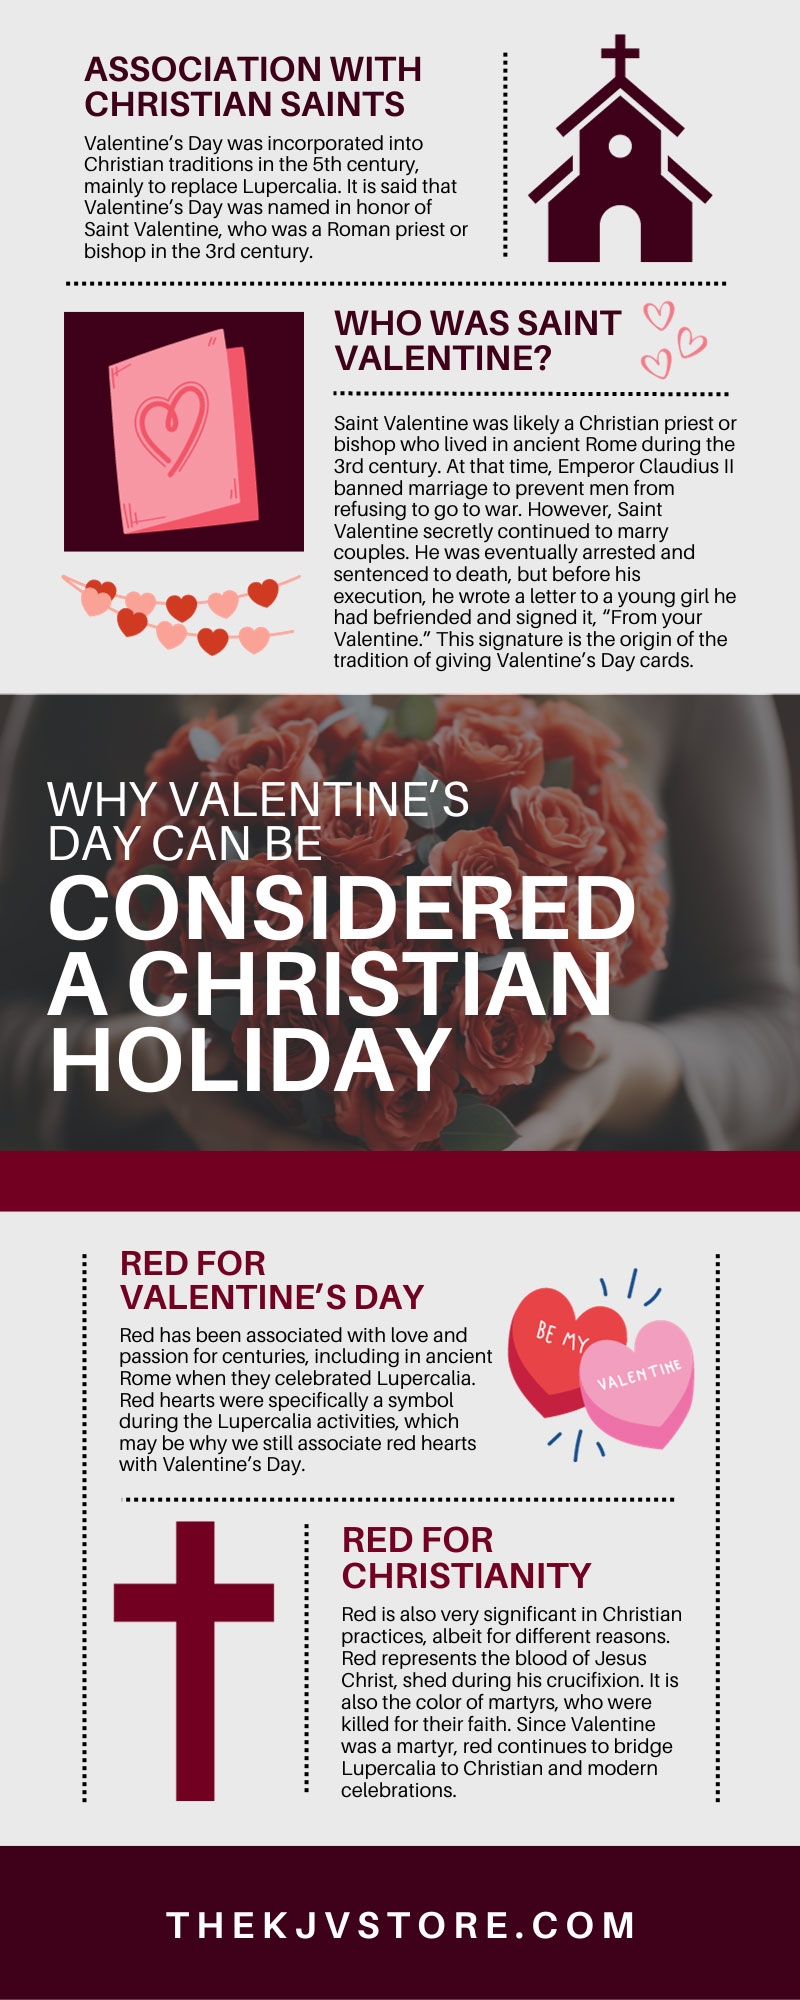 Why Valentine’s Day Can Be Considered a Christian Holiday